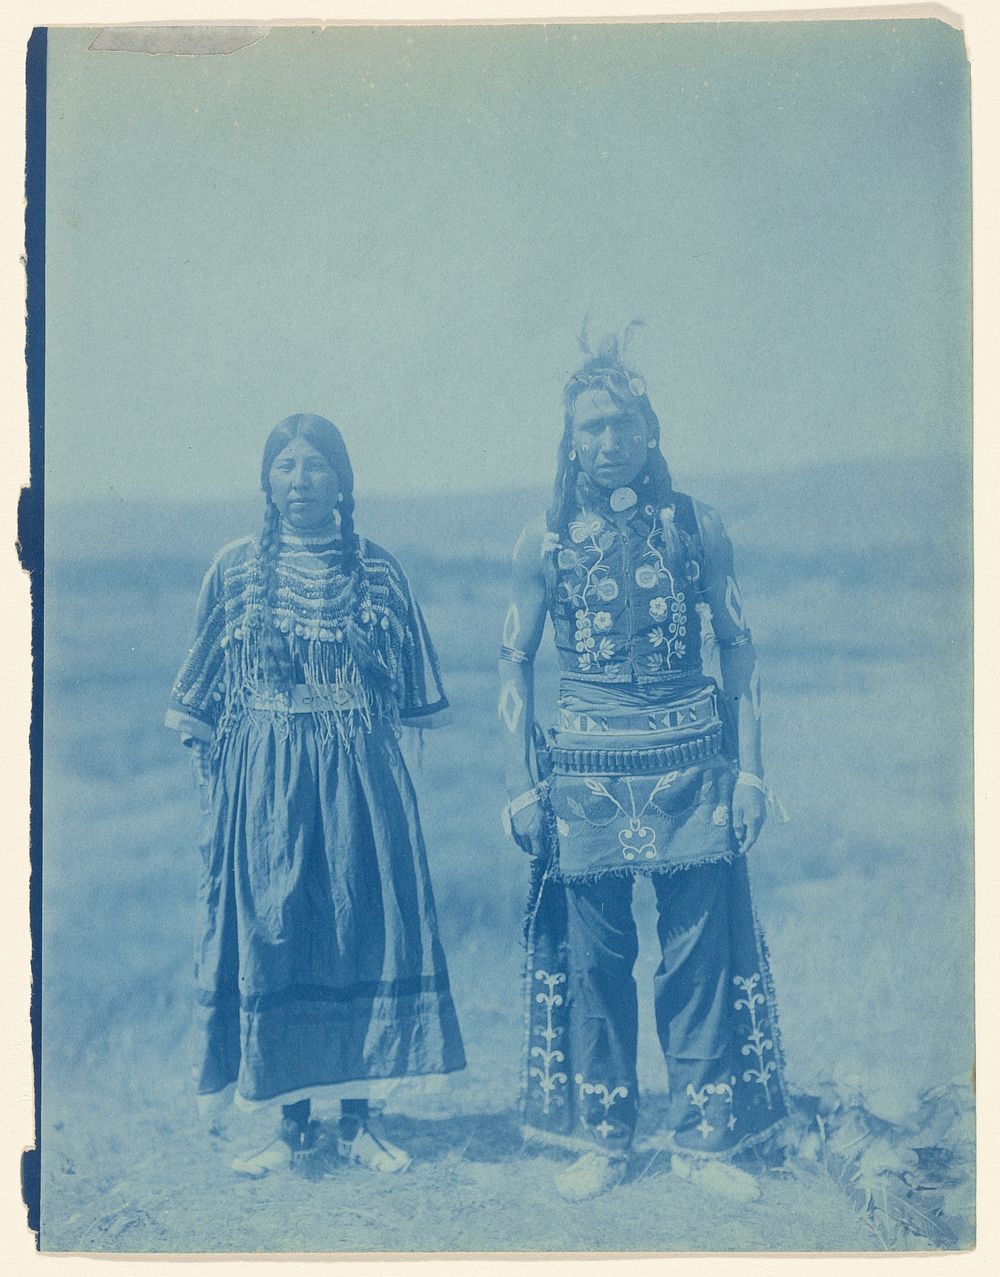 Piegan Man and Woman by Edward S Curtis